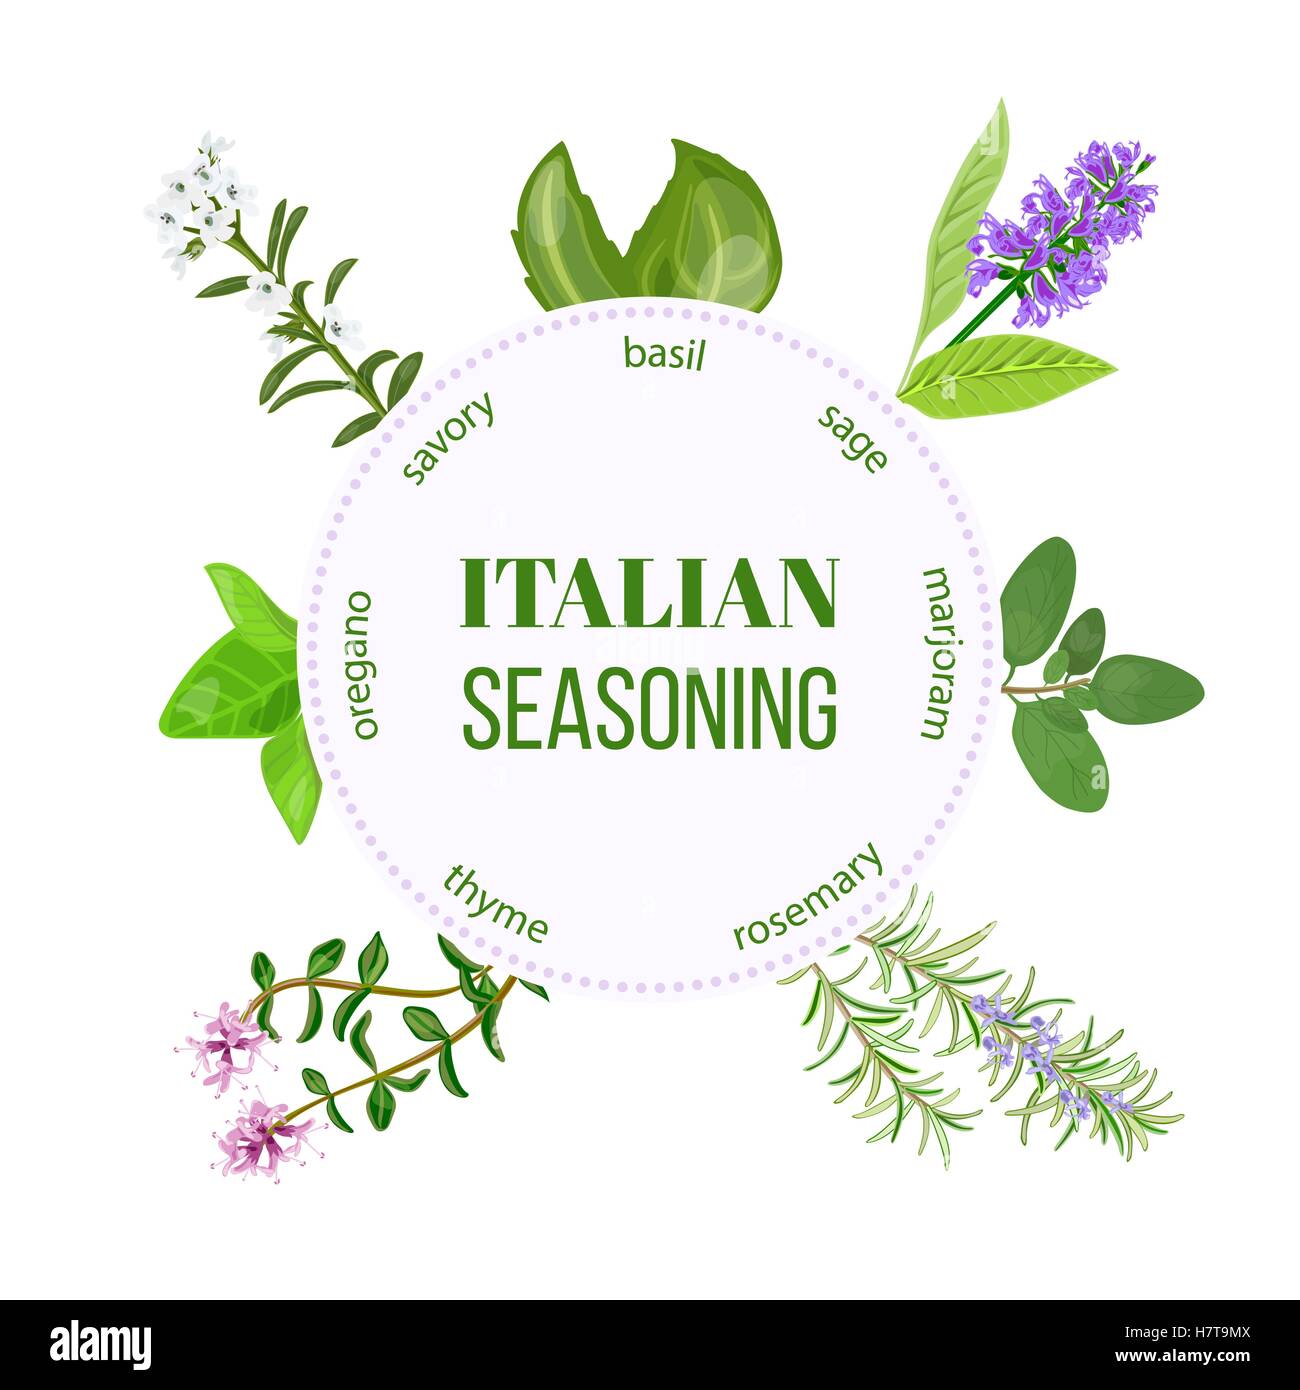 Italian seasoning traditional spice mix. Round emblem with type design for cosmetics, restaurant, store, market, natural health  Stock Vector